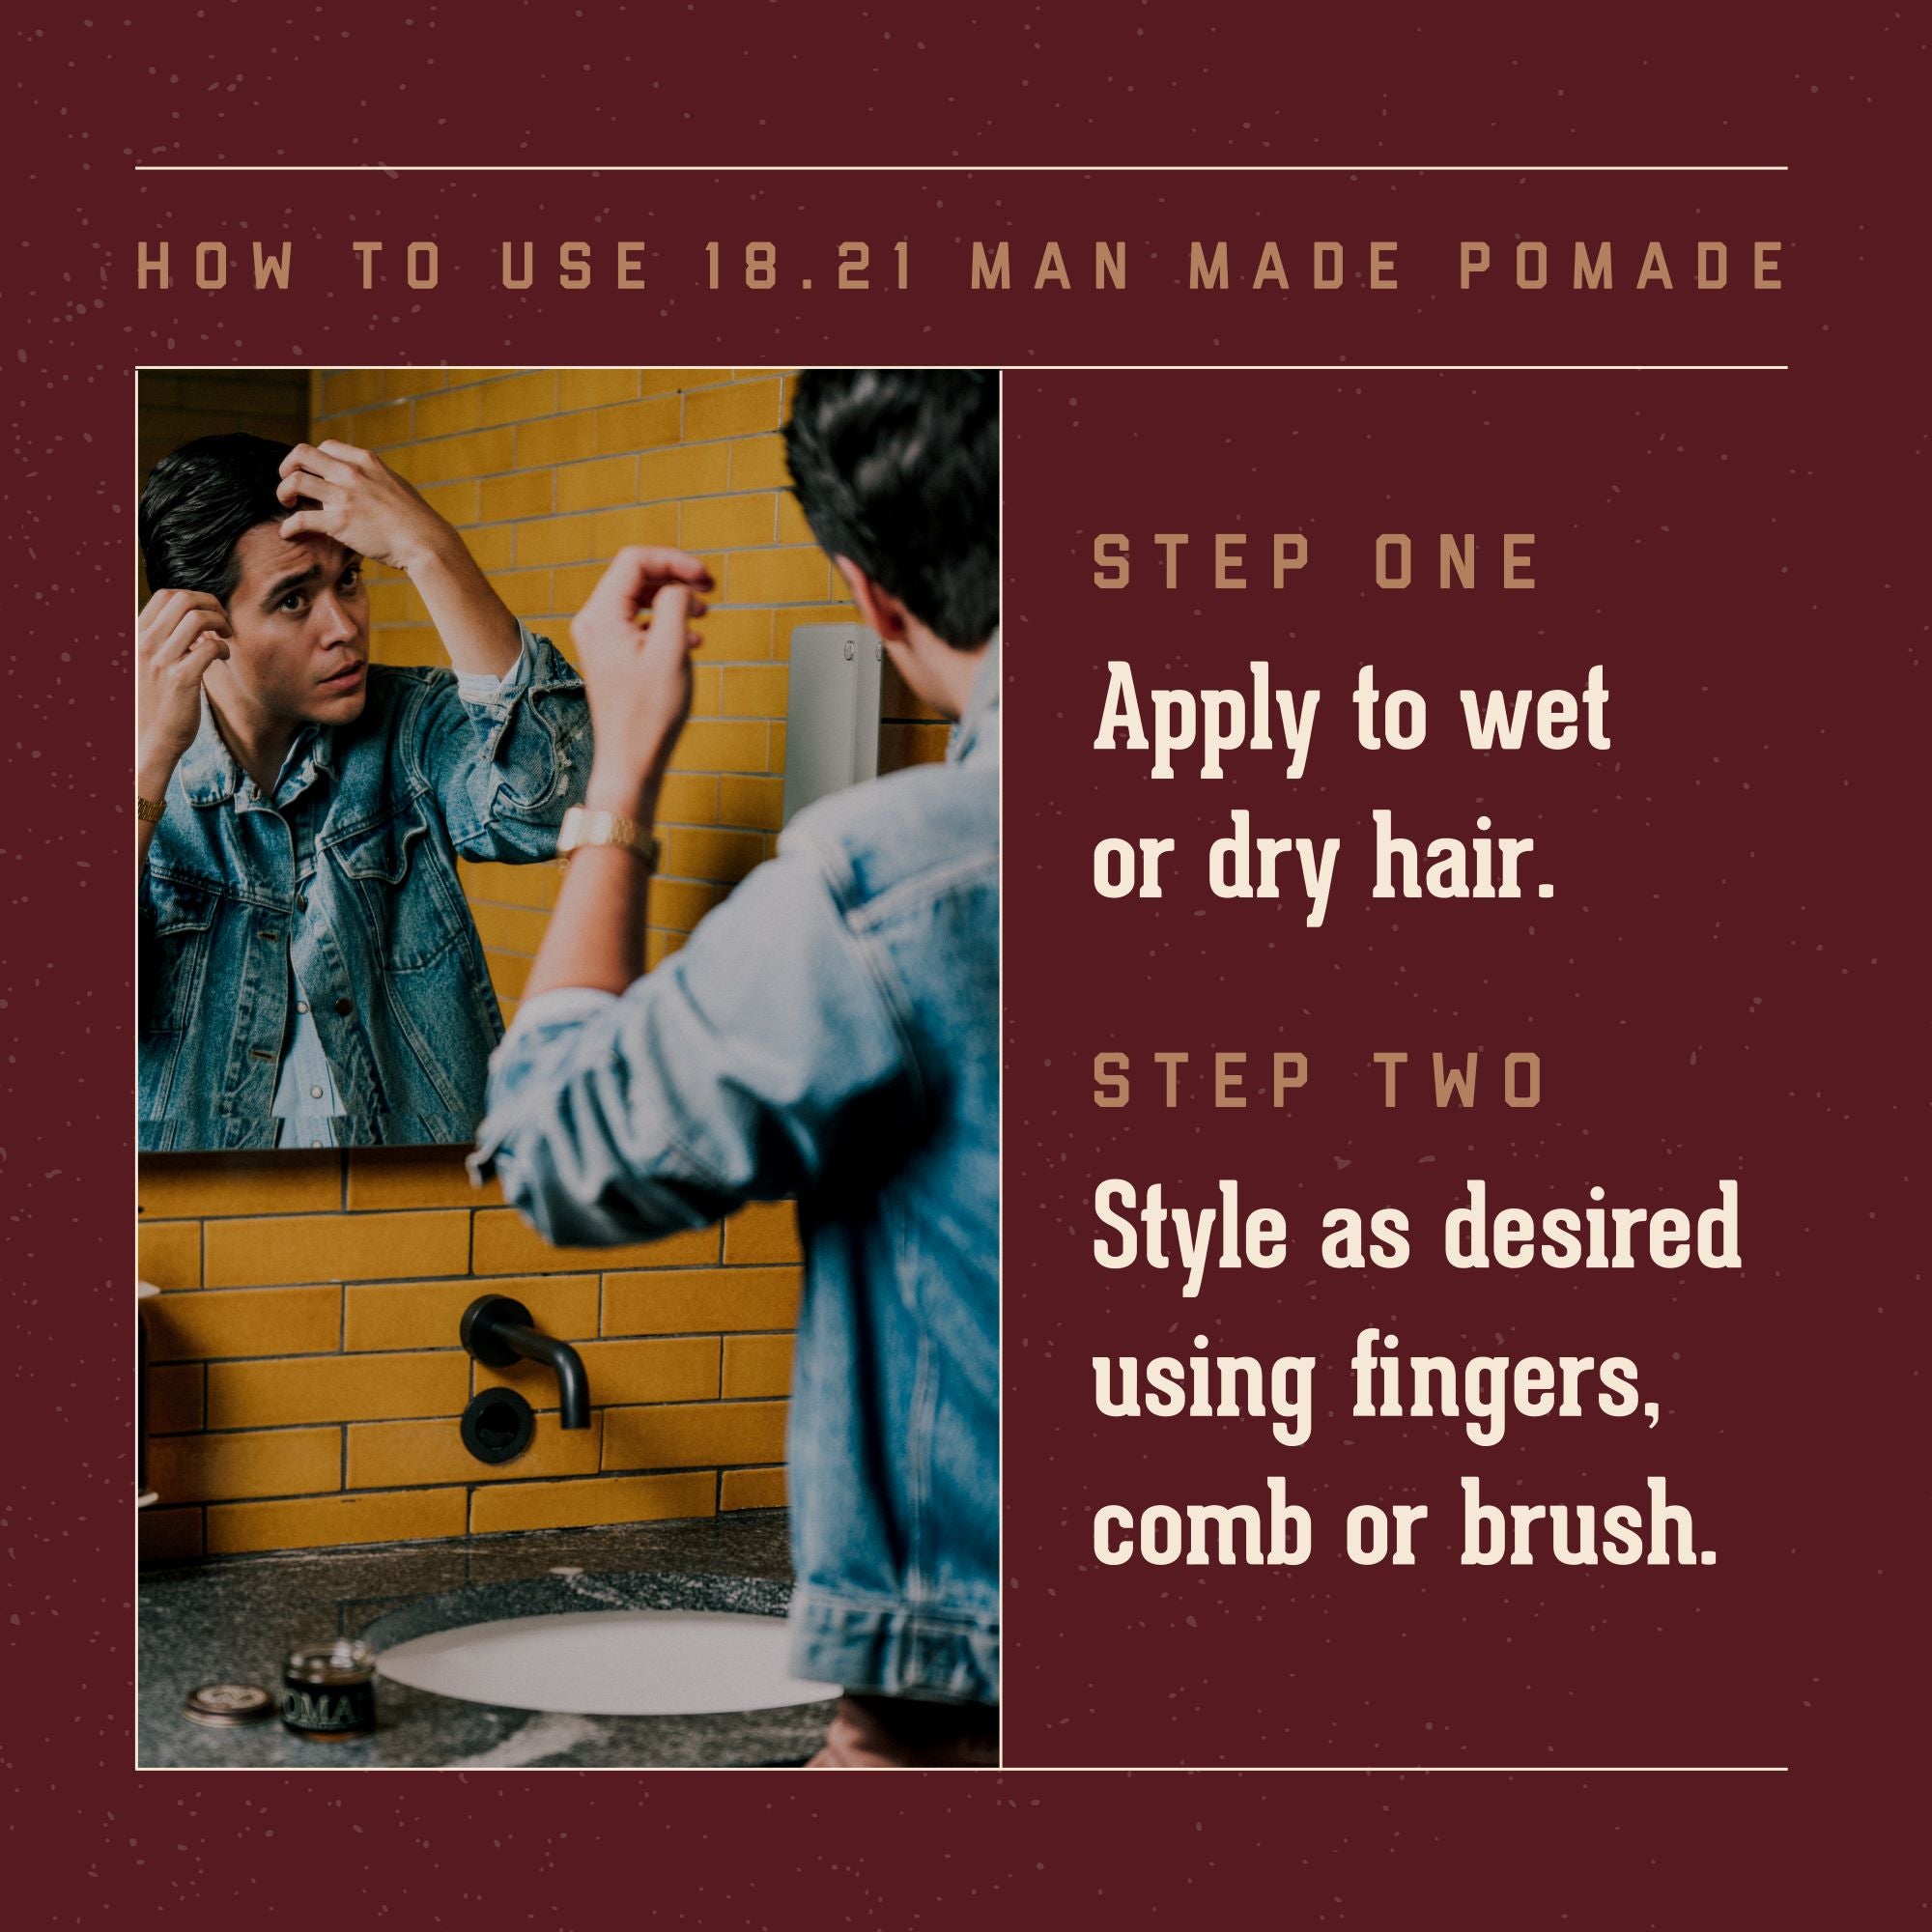 How to Use 18.21 Man Made Pomade. Step One: apply to wet or dry hair.  Step Two:  style as desired using fingers, comb or brush